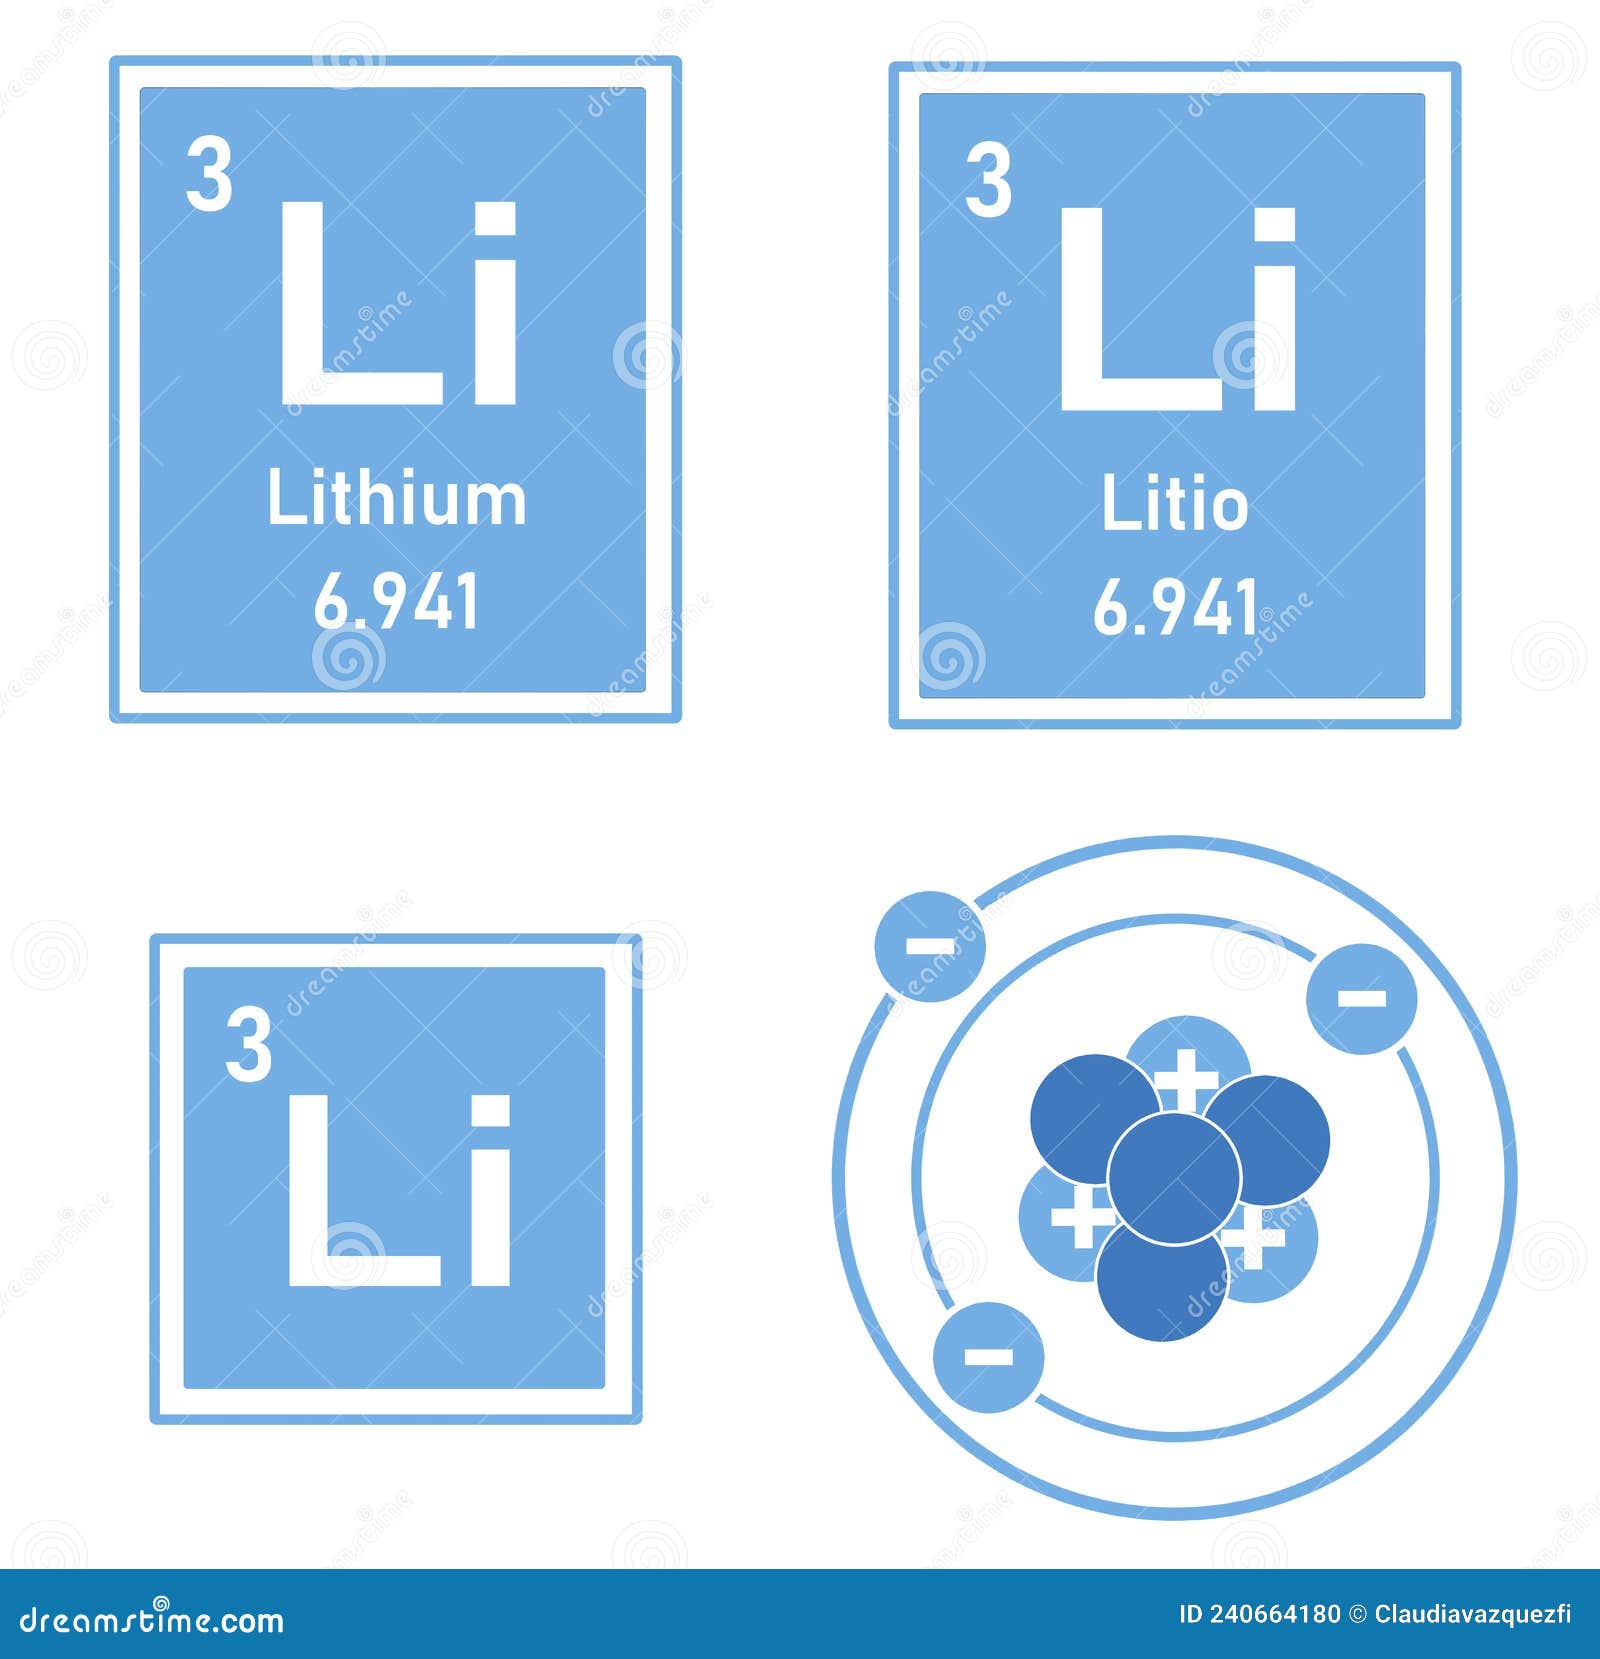 lithium icon of the periodic table